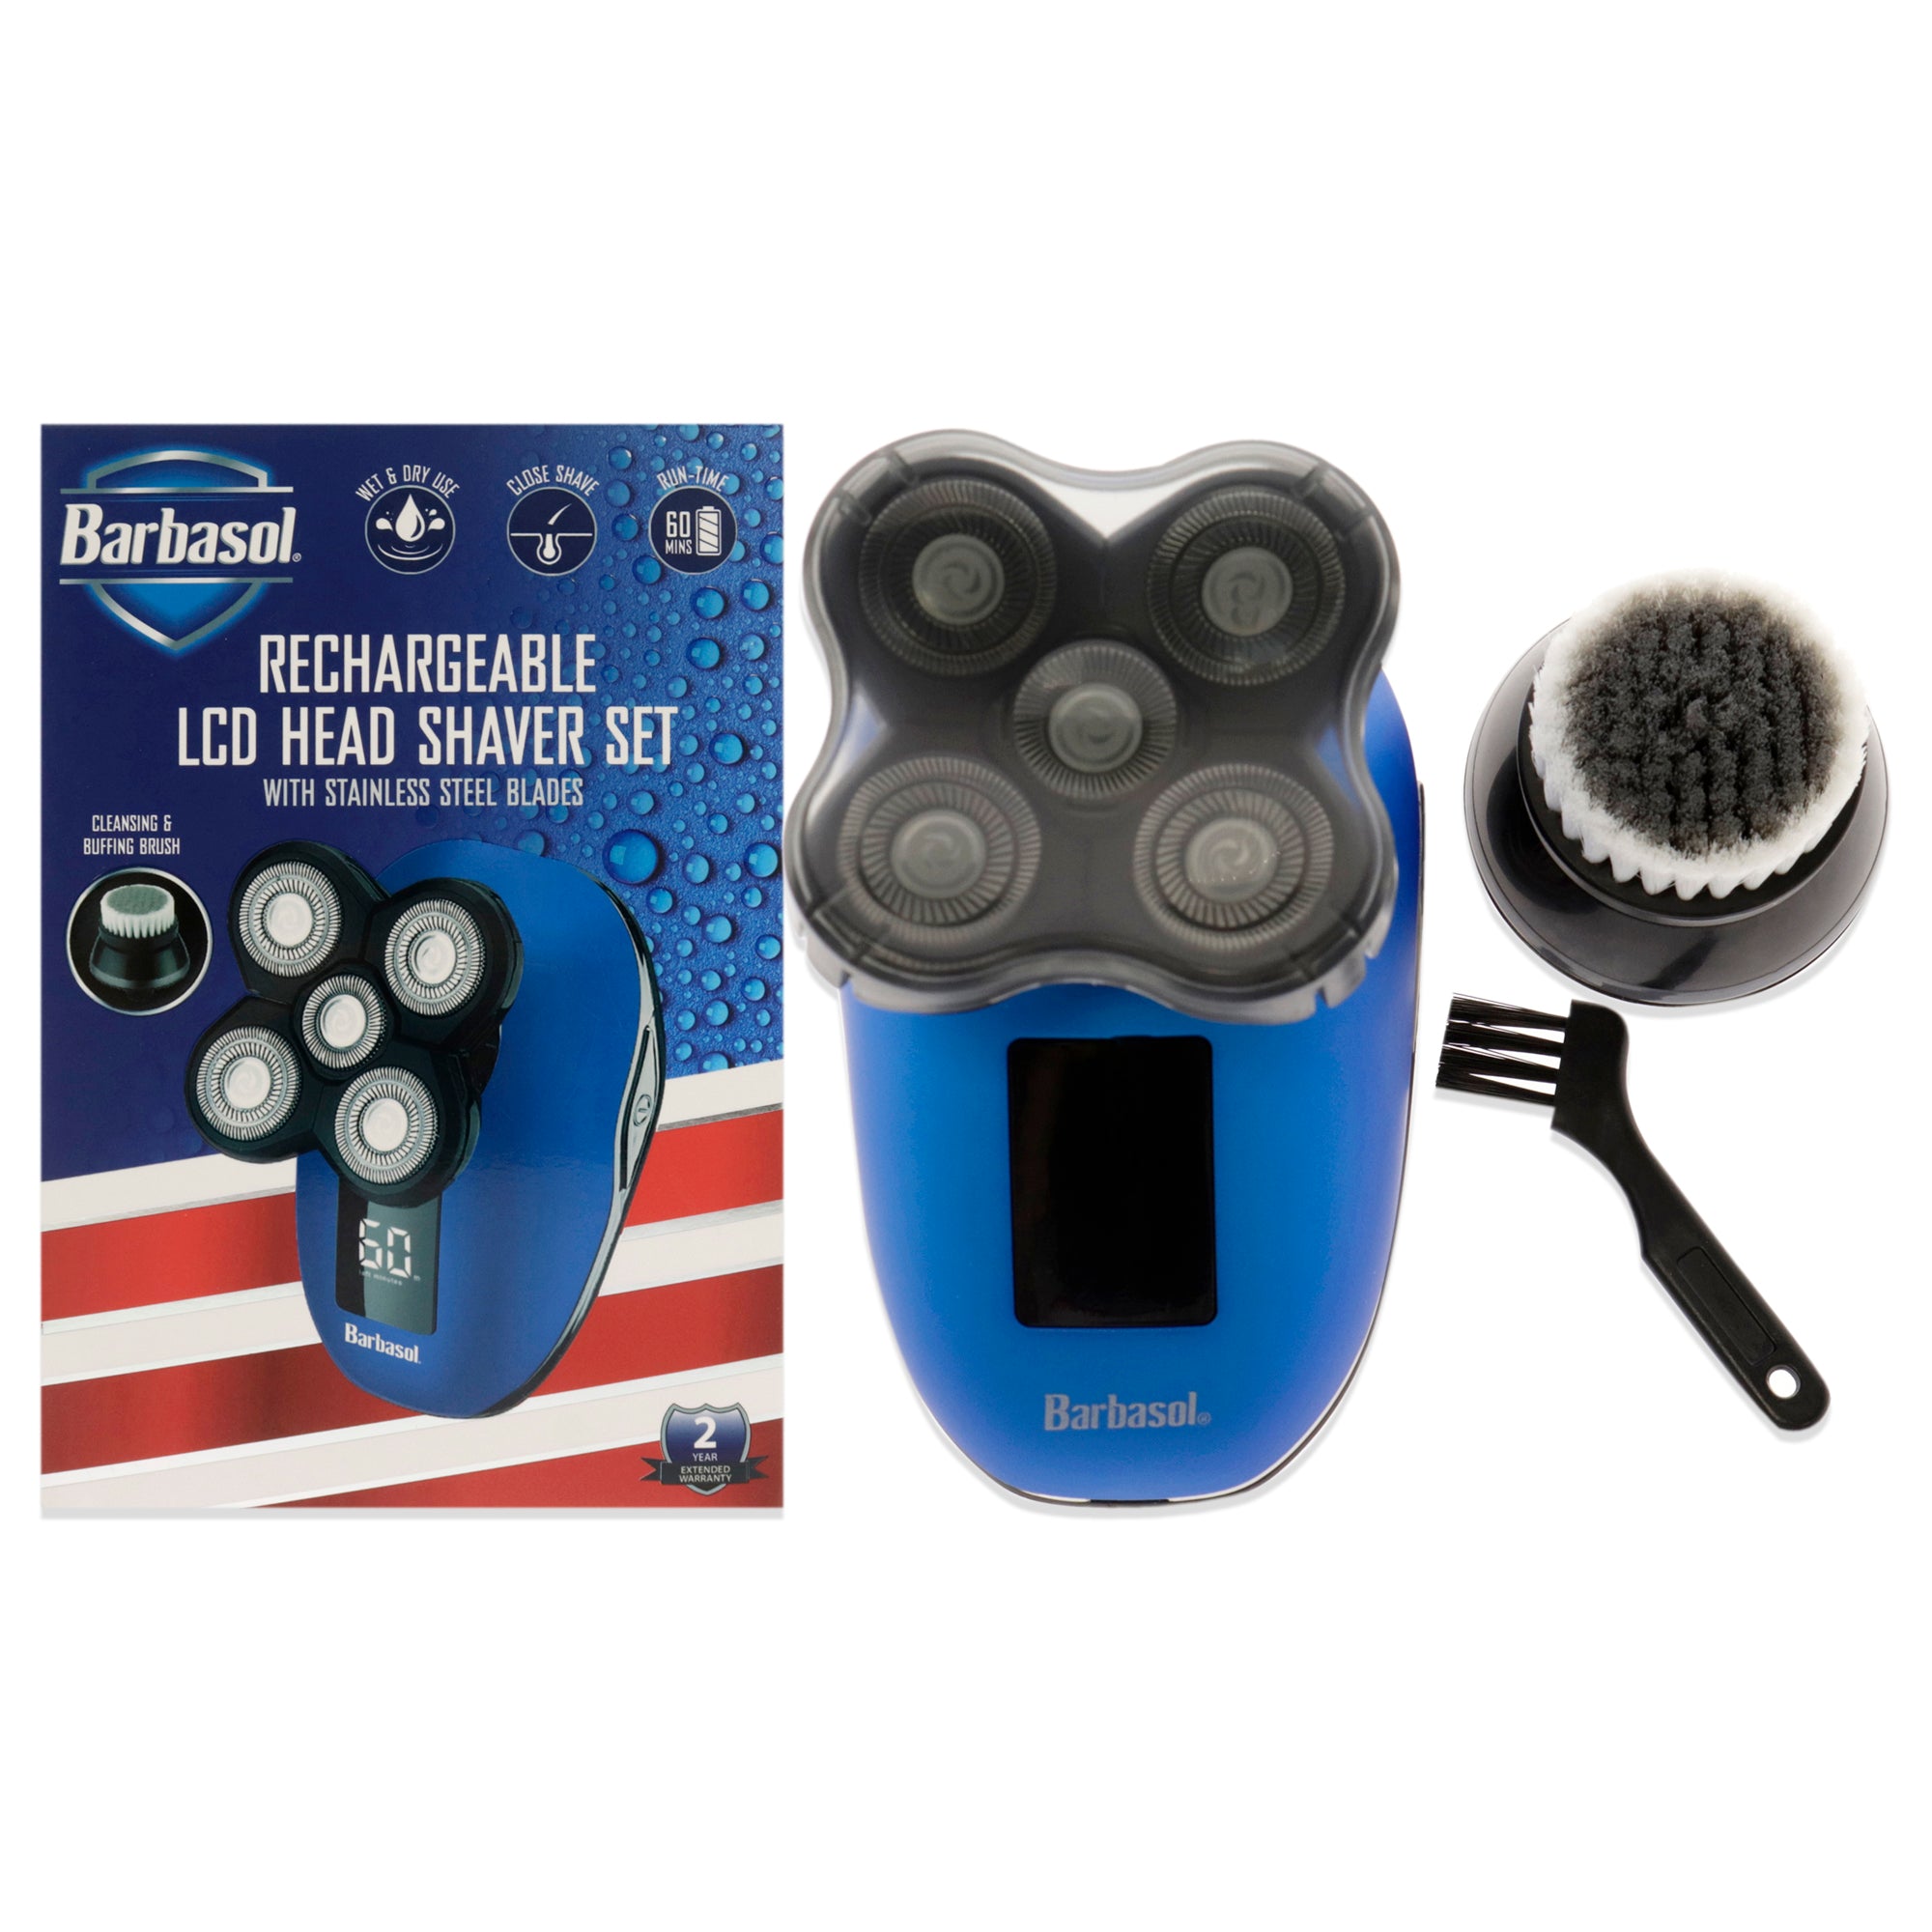 Rechargeable LCD 5 Head Wet-Dry Electric Shaver by Barbasol for Men - 1 Pc Shaver